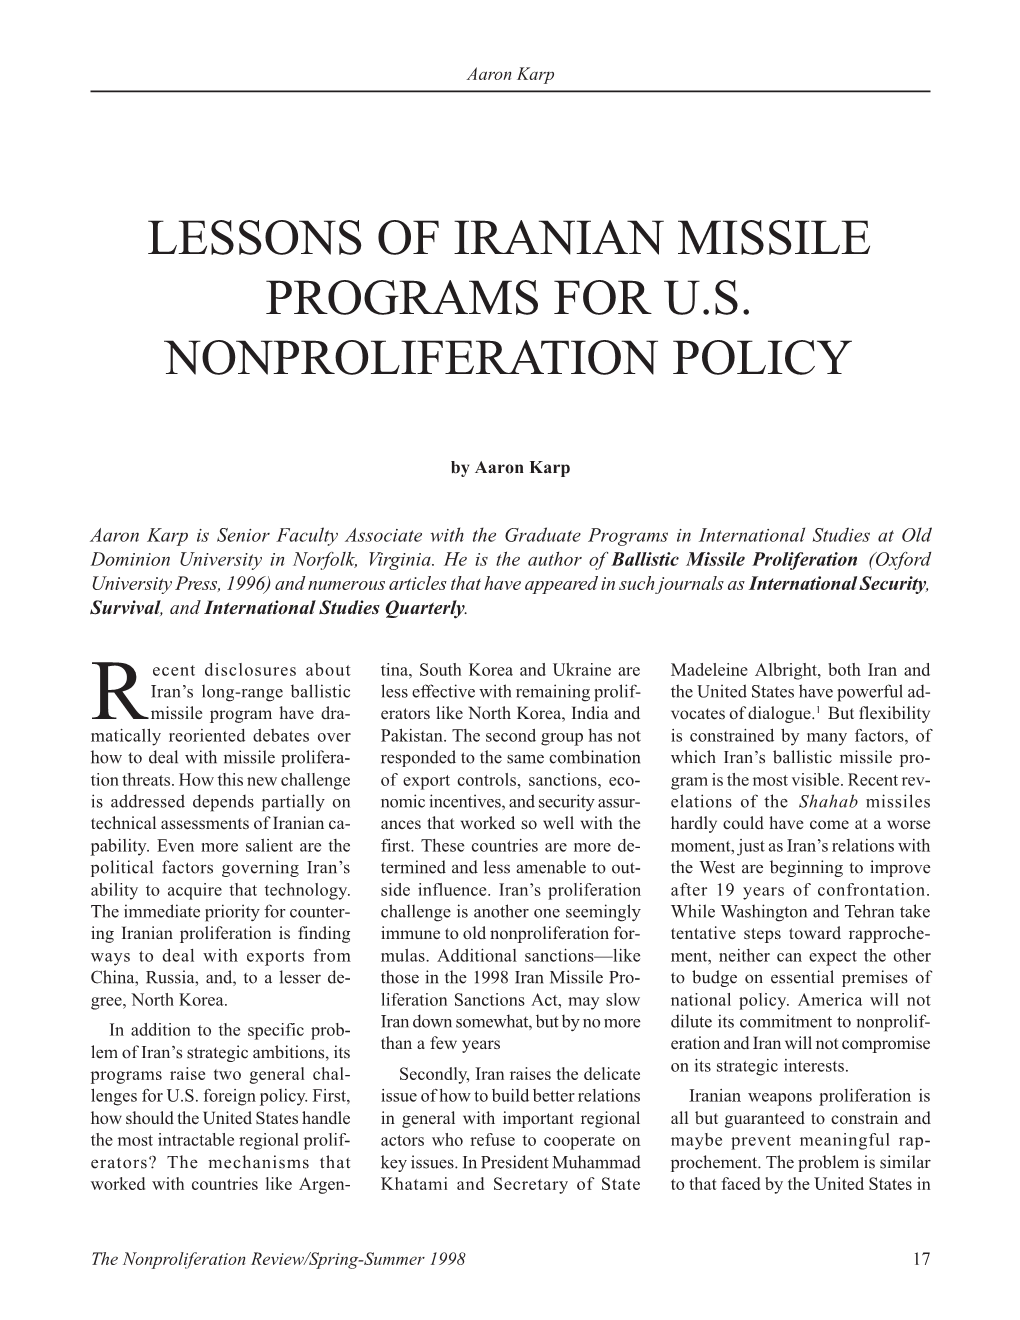 Npr 5.3: Lessons of Iranian Missile Programs for U.S. Nonproliferation Policy